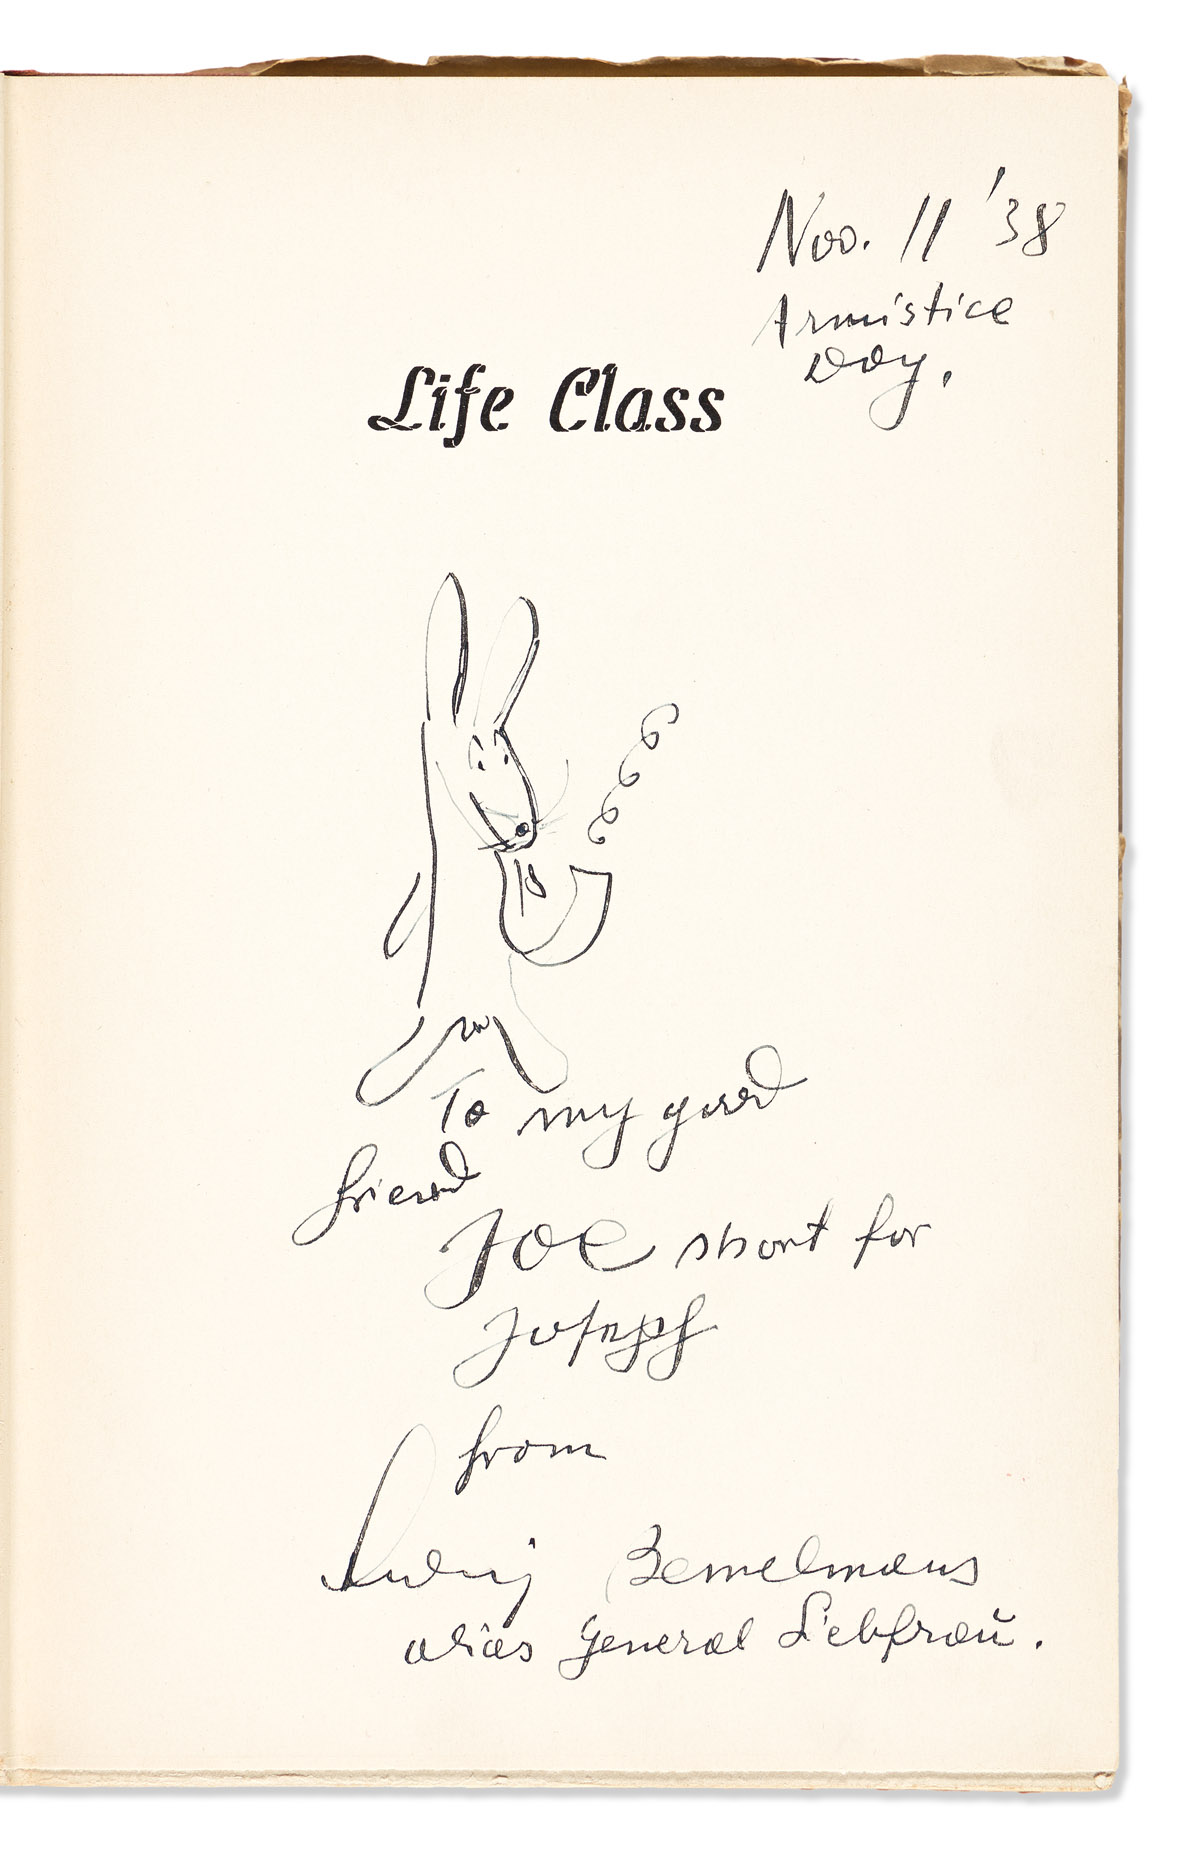 BEMELMANS, LUDWIG. Life Class. Signed and Inscribed, with a small ink drawing, To my good / friend / Joe short for / Joseph / from Lud